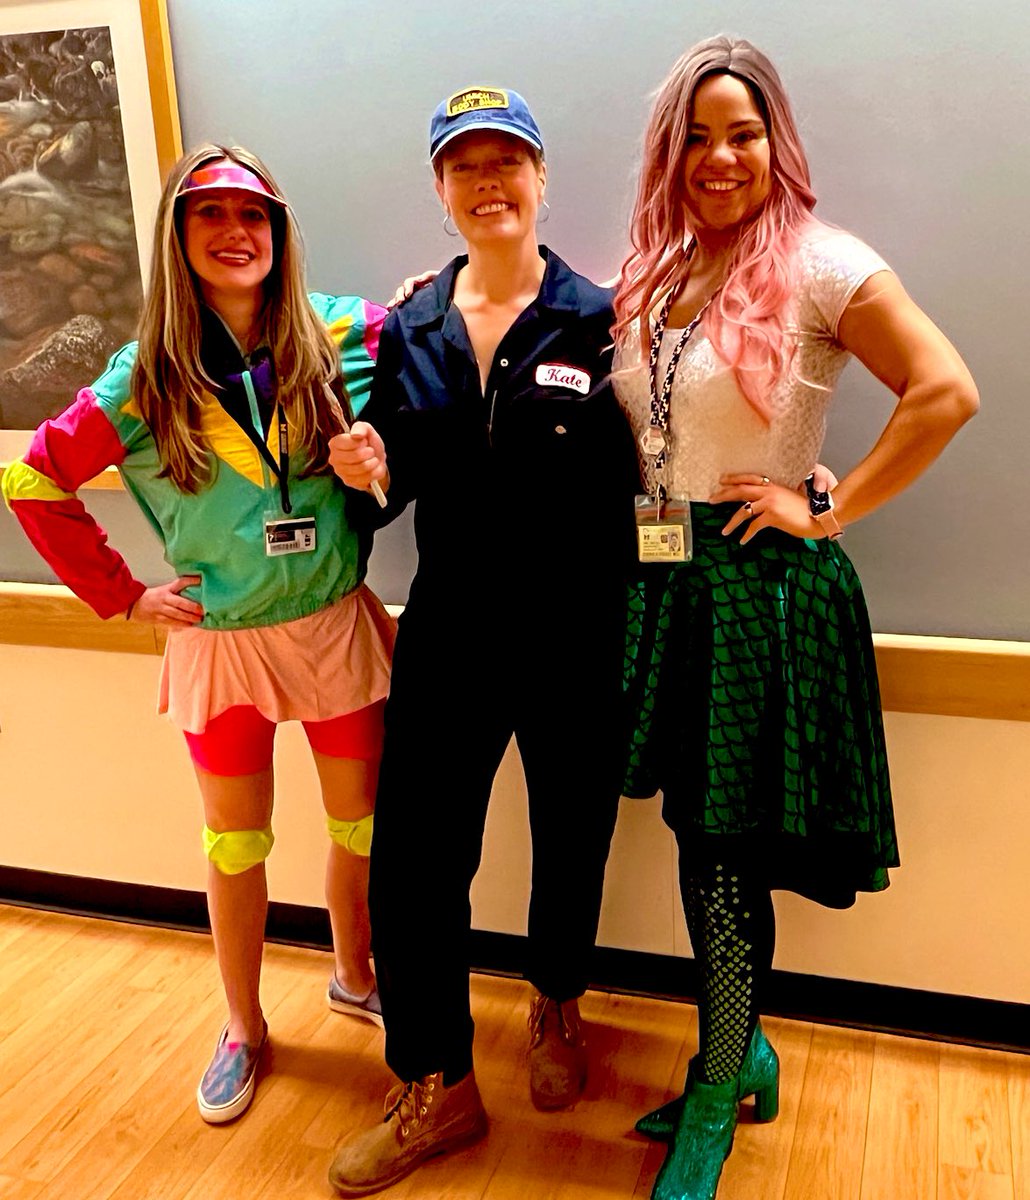 Happy Halloween from @UMichRadiology body reading room! Ahem, we do recognize that @UNCRadiology has just set the group costuming bar for next year. Watch this space! 🎃🎃🎃🎃🎃